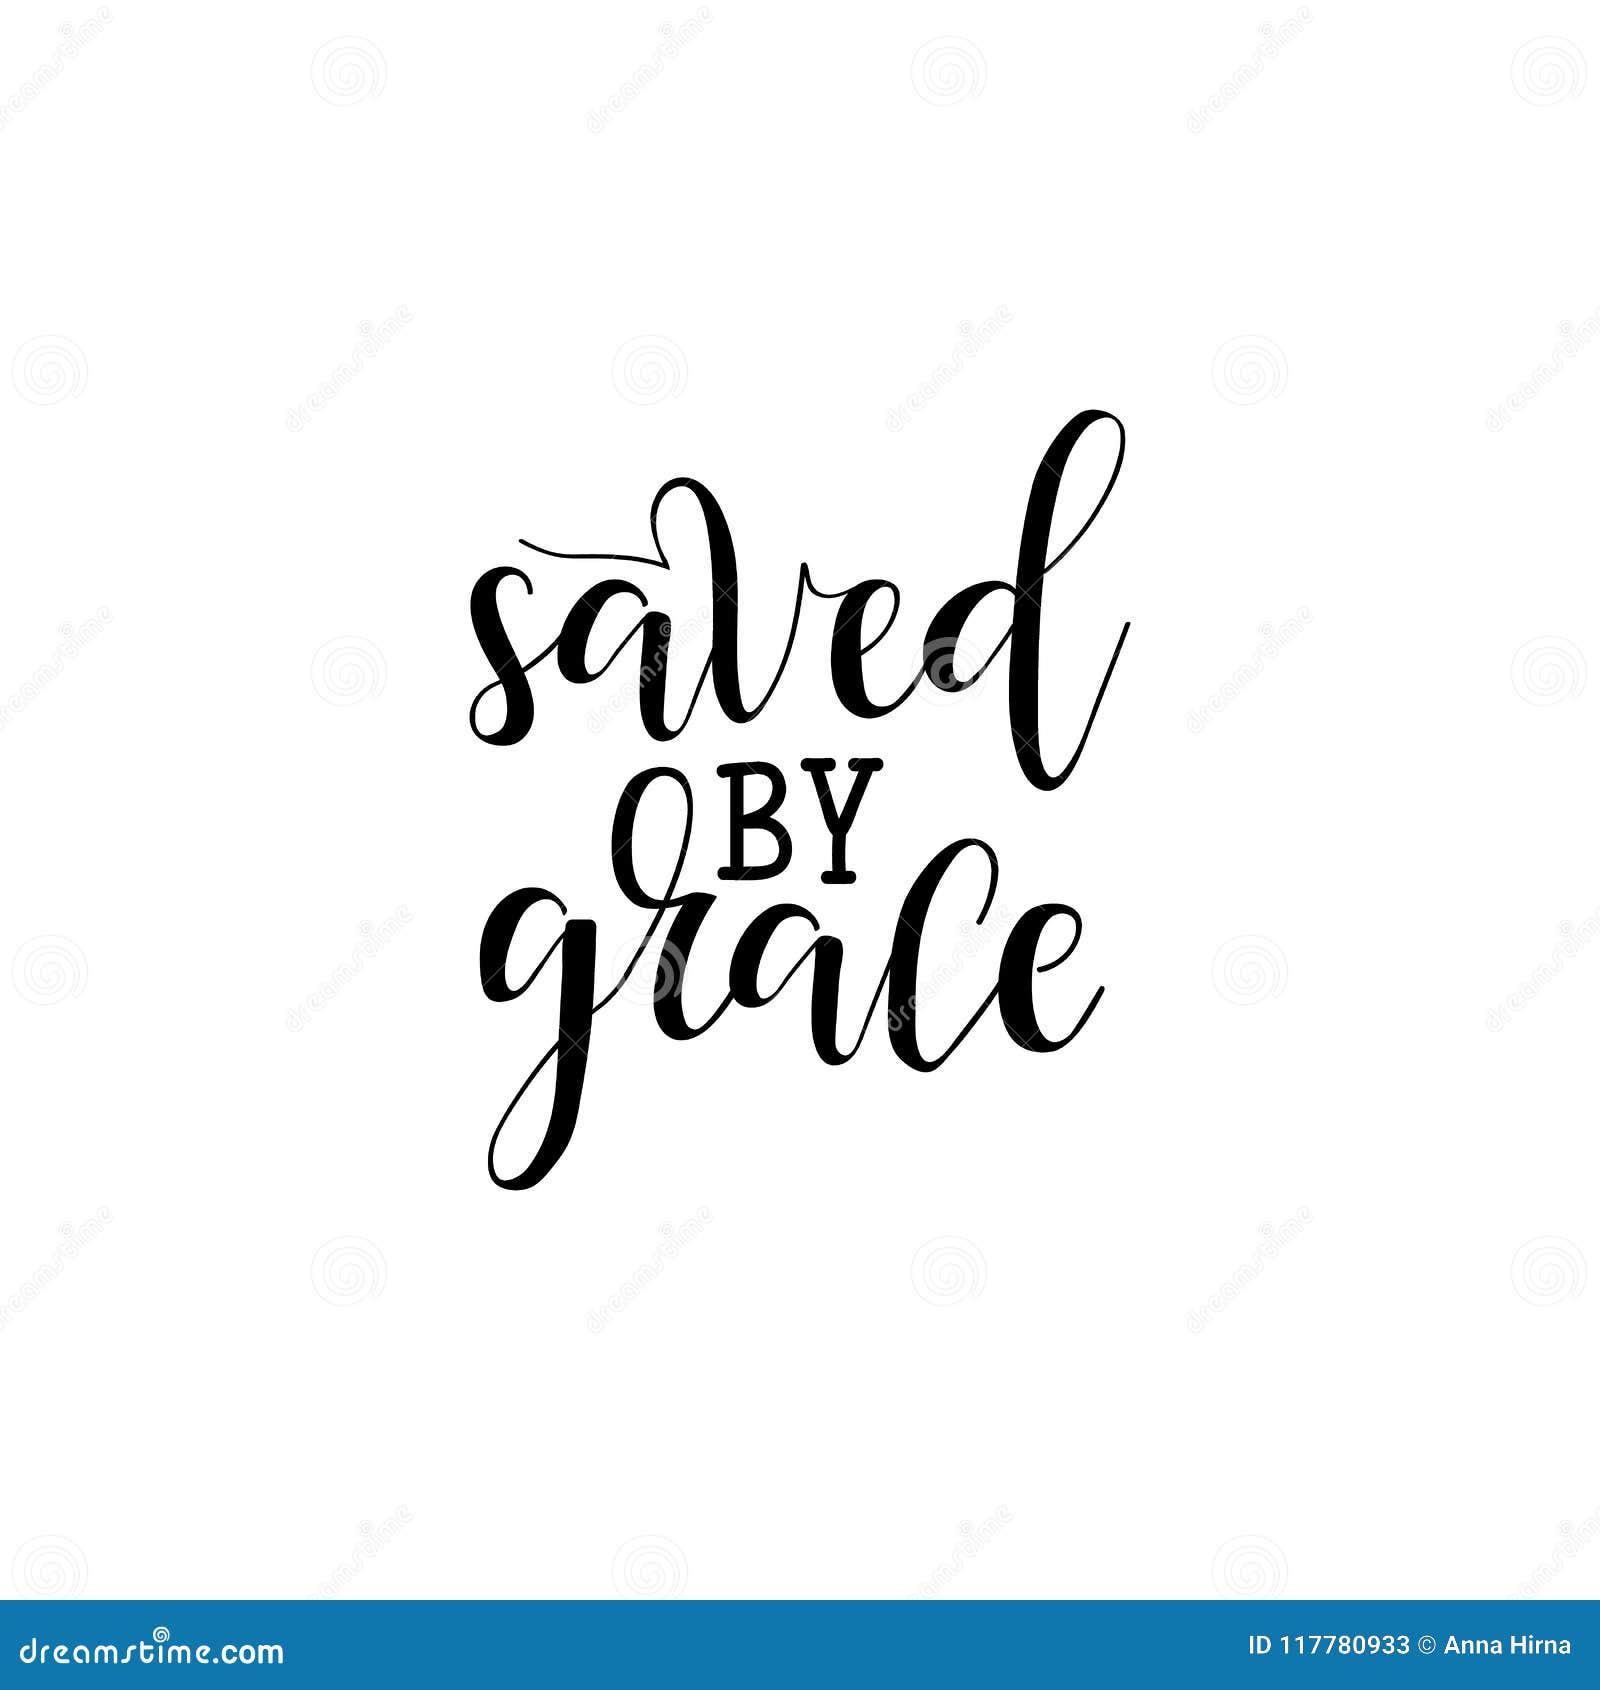 Saved By Grace Hand Drawn Lettering Ink Illustration Modern Brush